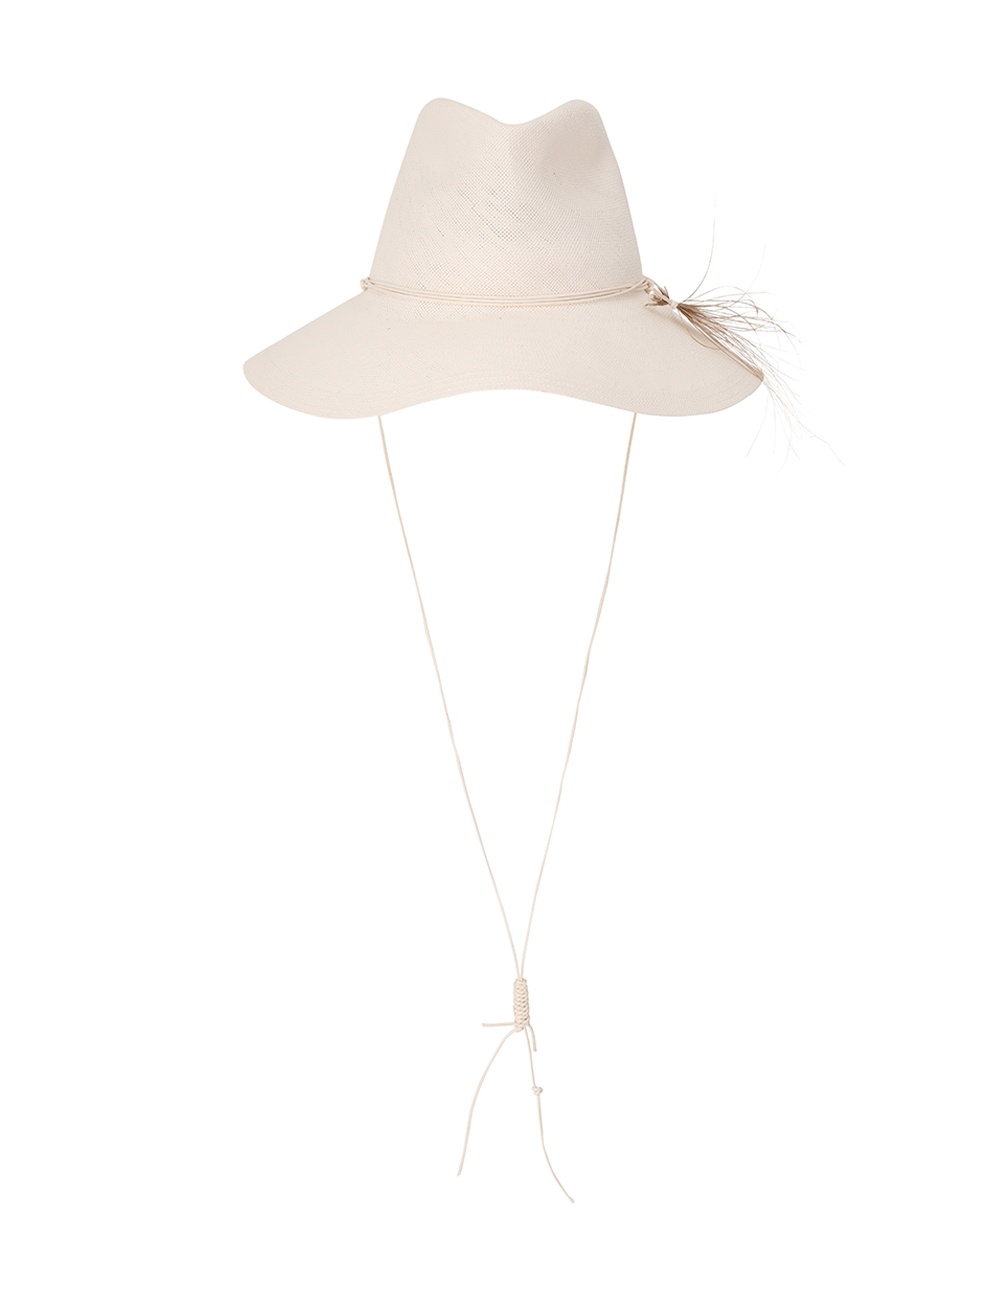 GLAZED STRAW COLLAPSIBLE HAT - 1